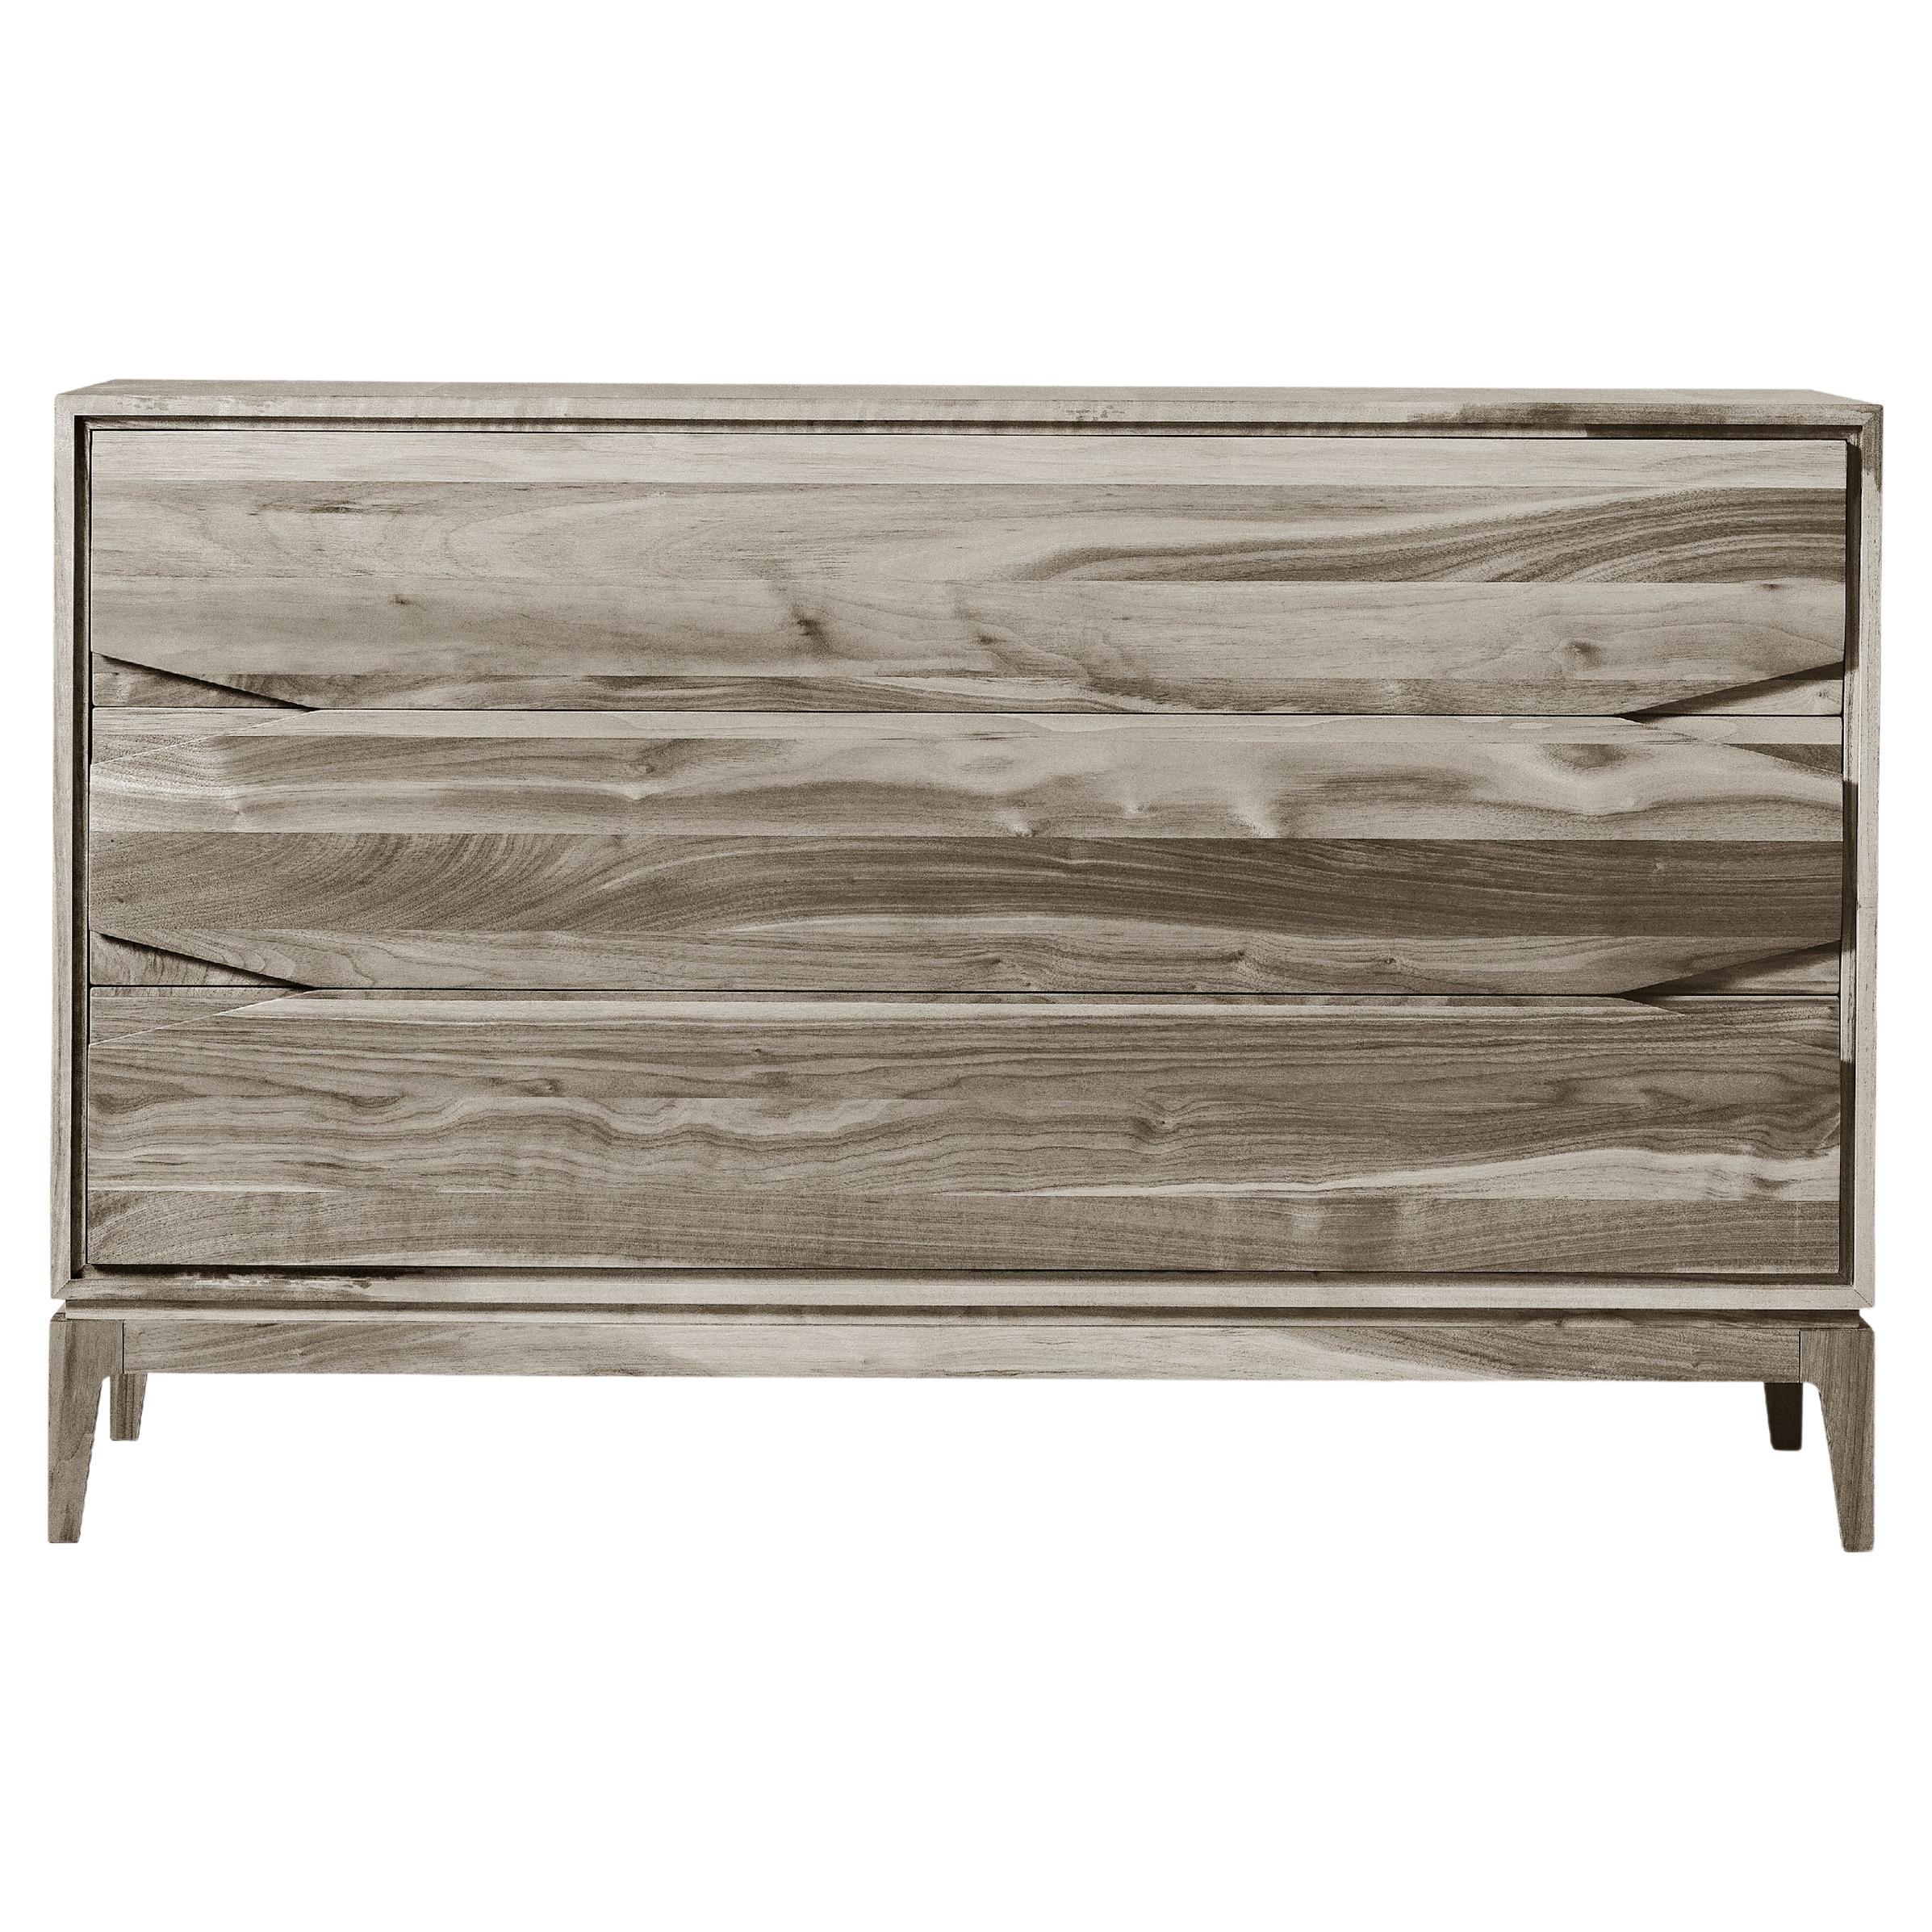 Base Solid Wood Dresser, Walnut in Hand-Made Natural Grey Finish, Contemporary For Sale